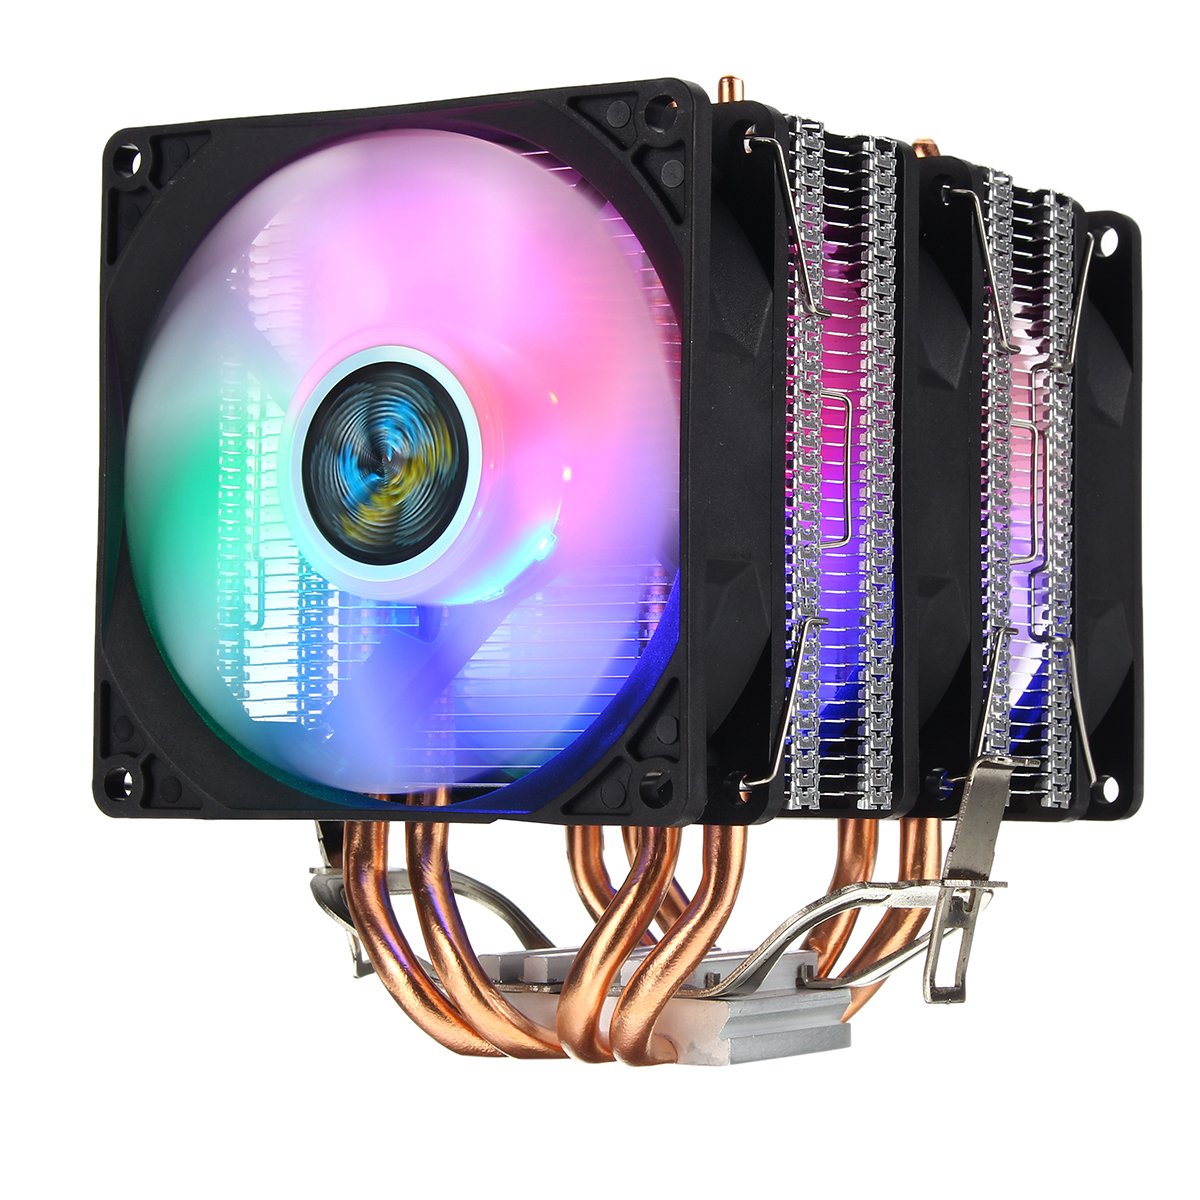 3 Pin Triple Fans Four Copper Heat Pipes Colorful LED Light CPU Cooling Fan Cooler Heatsink for Intel AMD 2